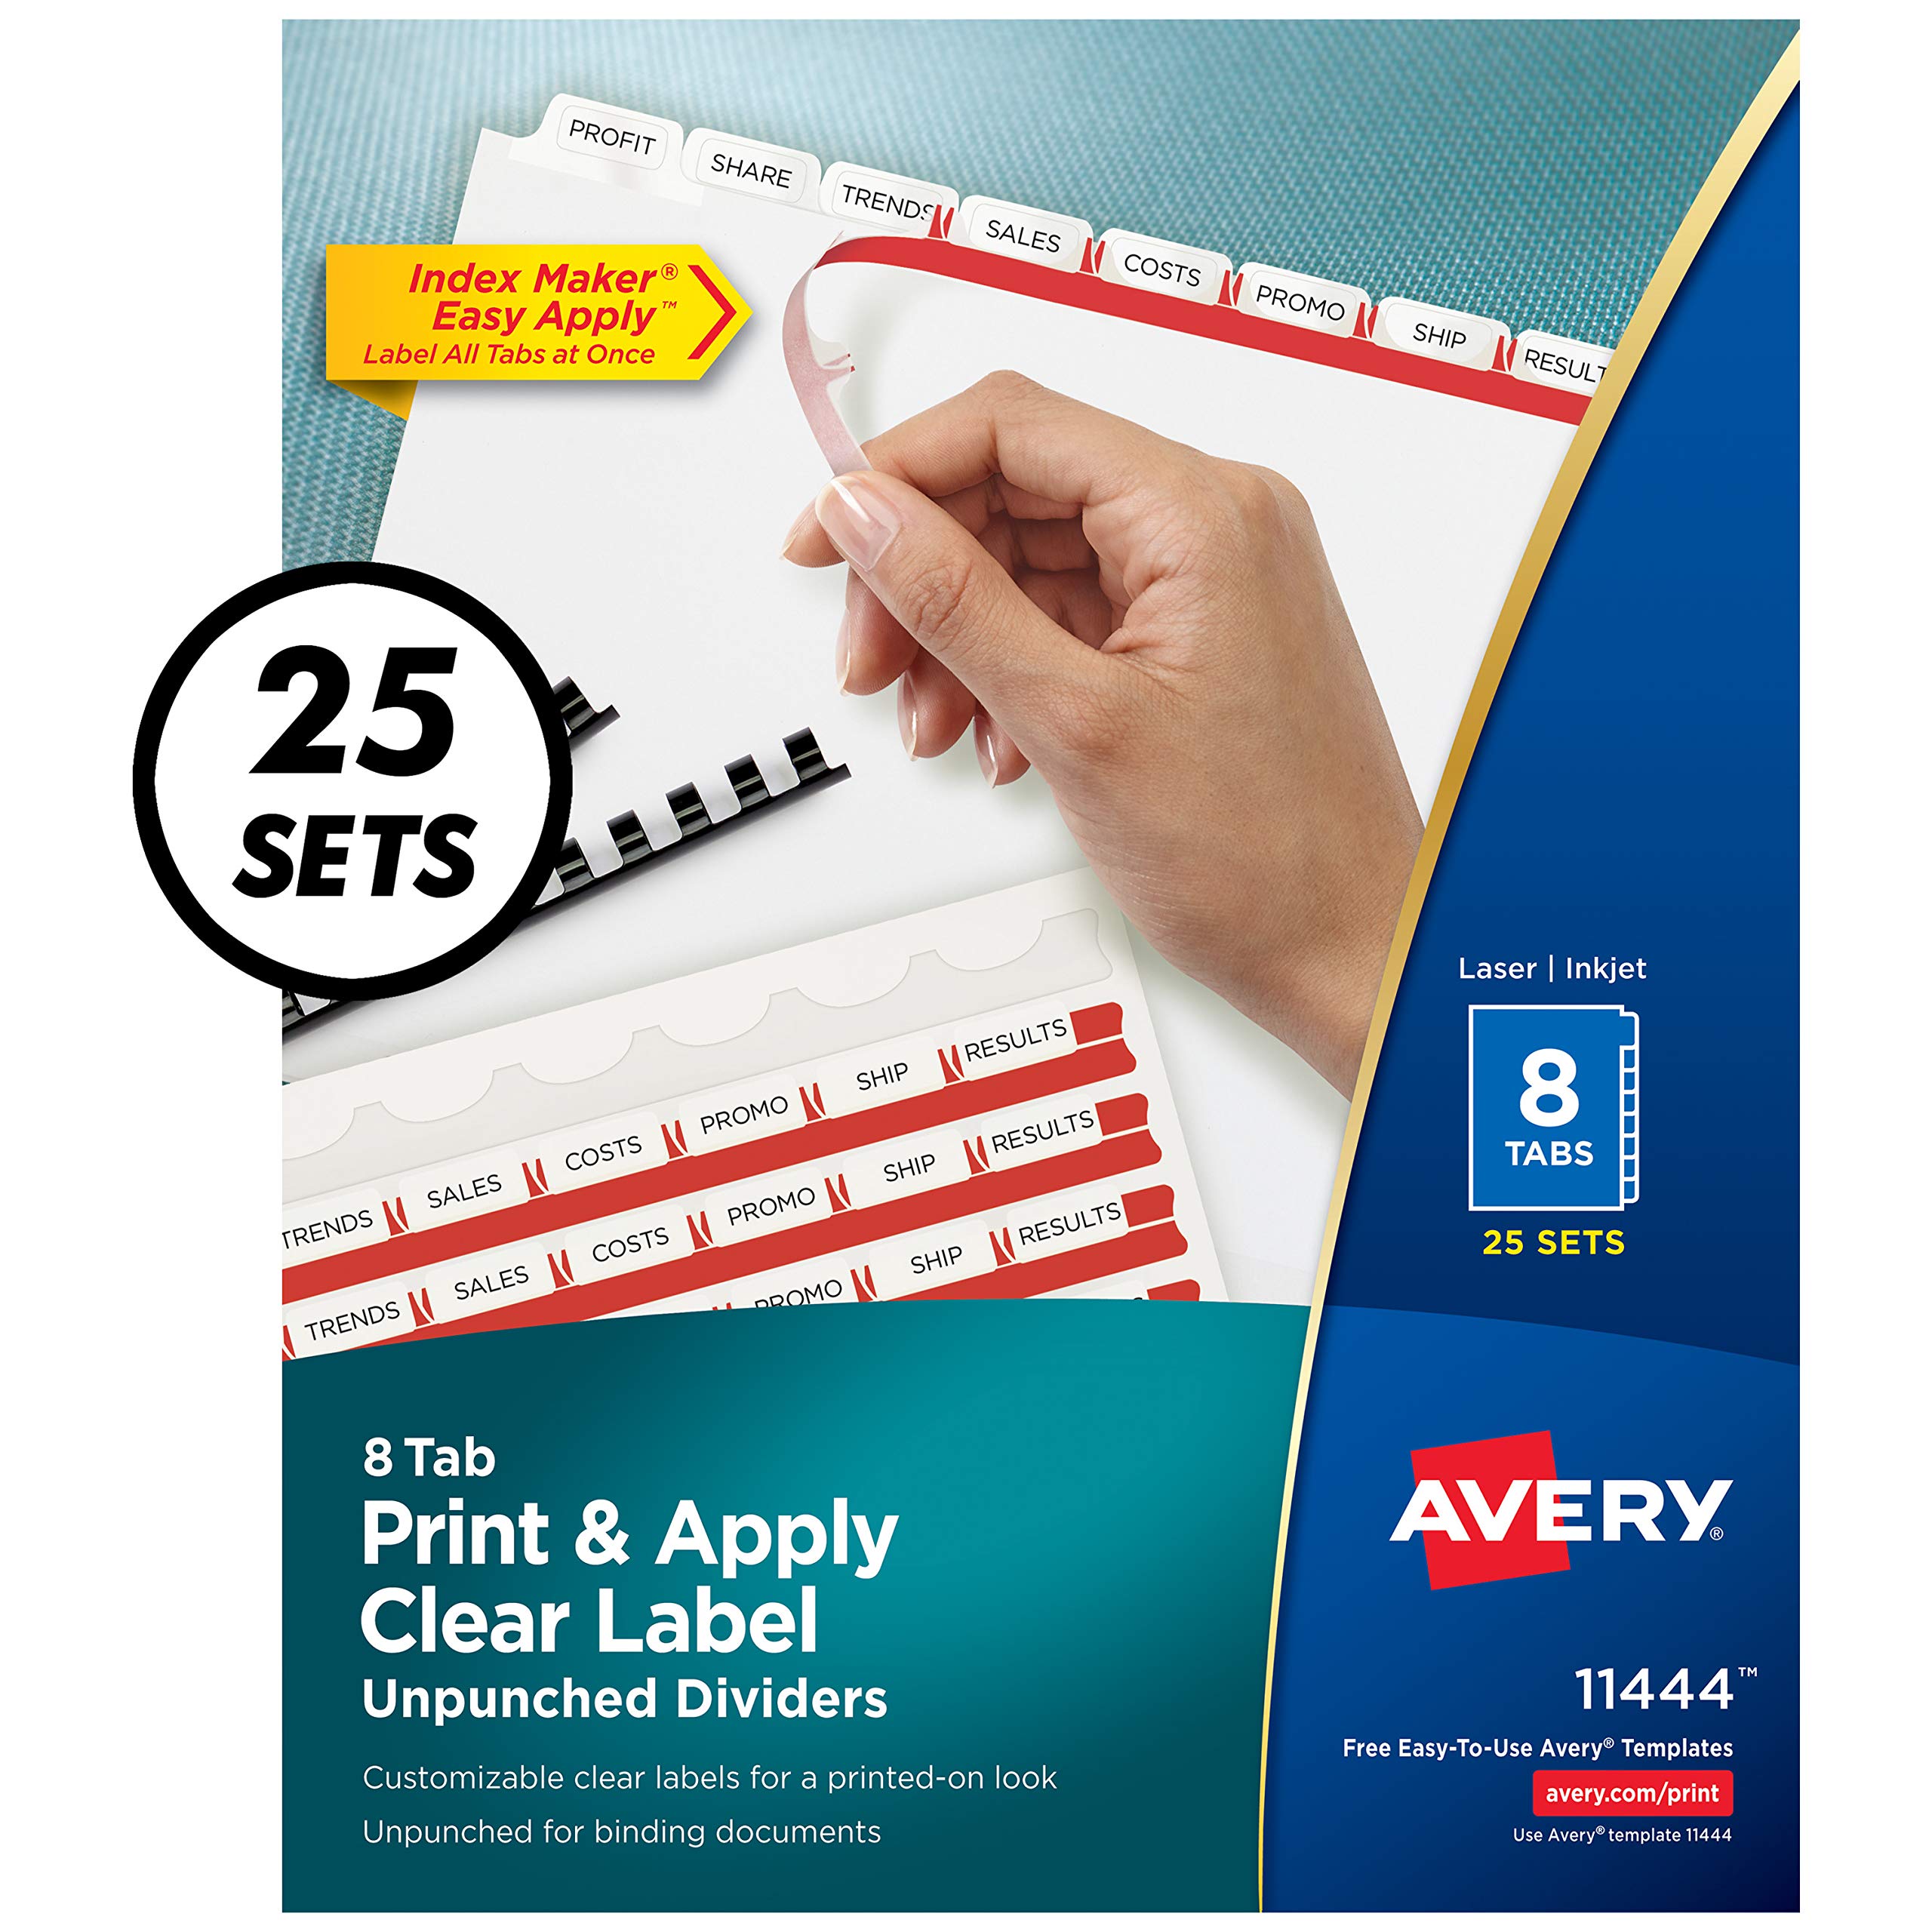 Avery 8-Tab Unpunched Binder Dividers, Easy Print & Apply Clear Label Strip, Index Maker, White Tabs, 25 Sets, 6 Packs (11444)